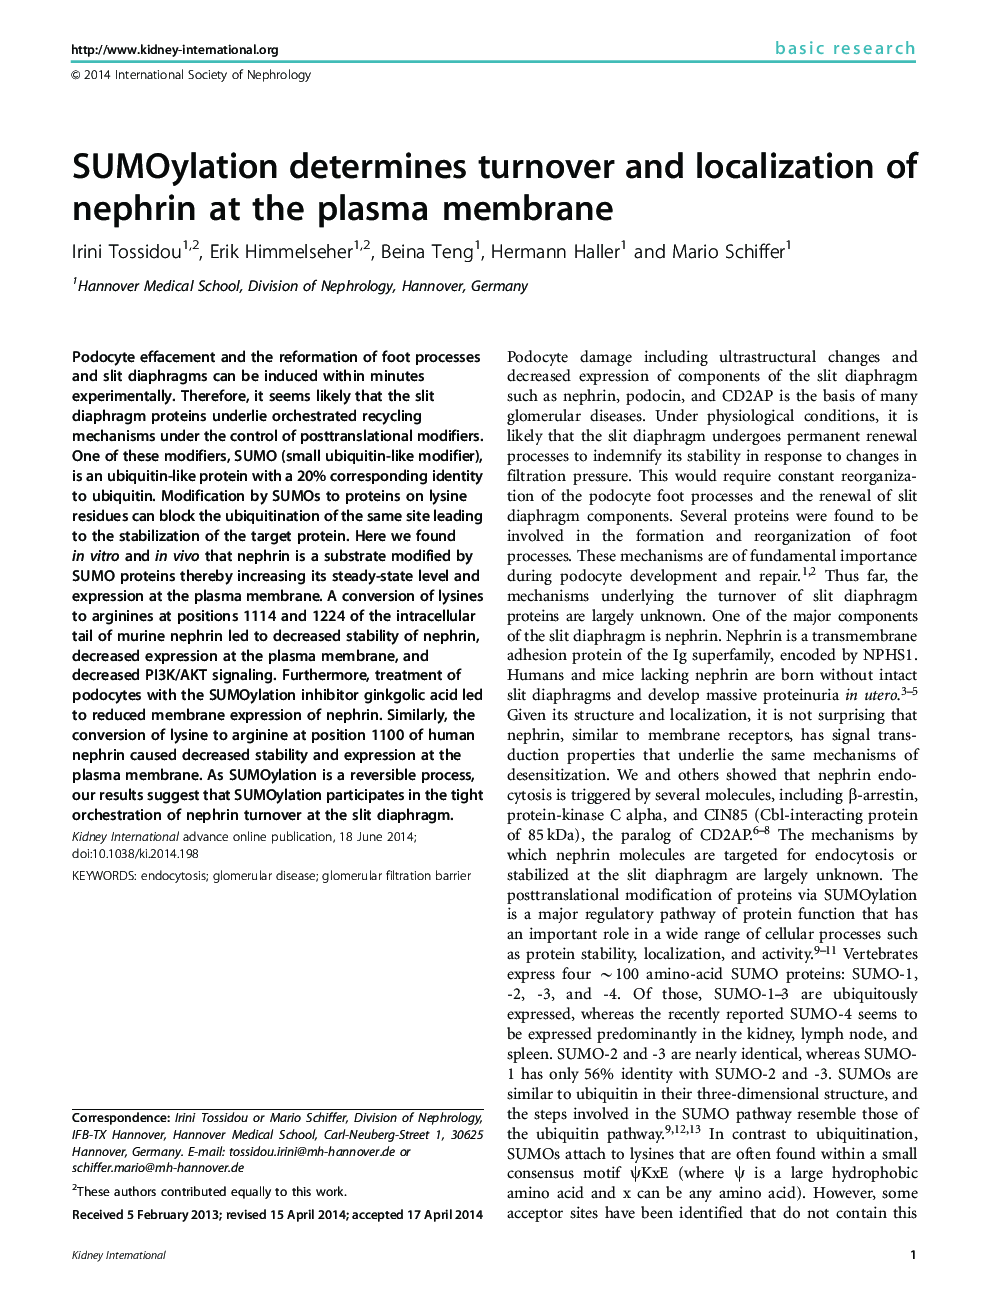 SUMOylation determines turnover and localization of nephrin at the plasma membrane